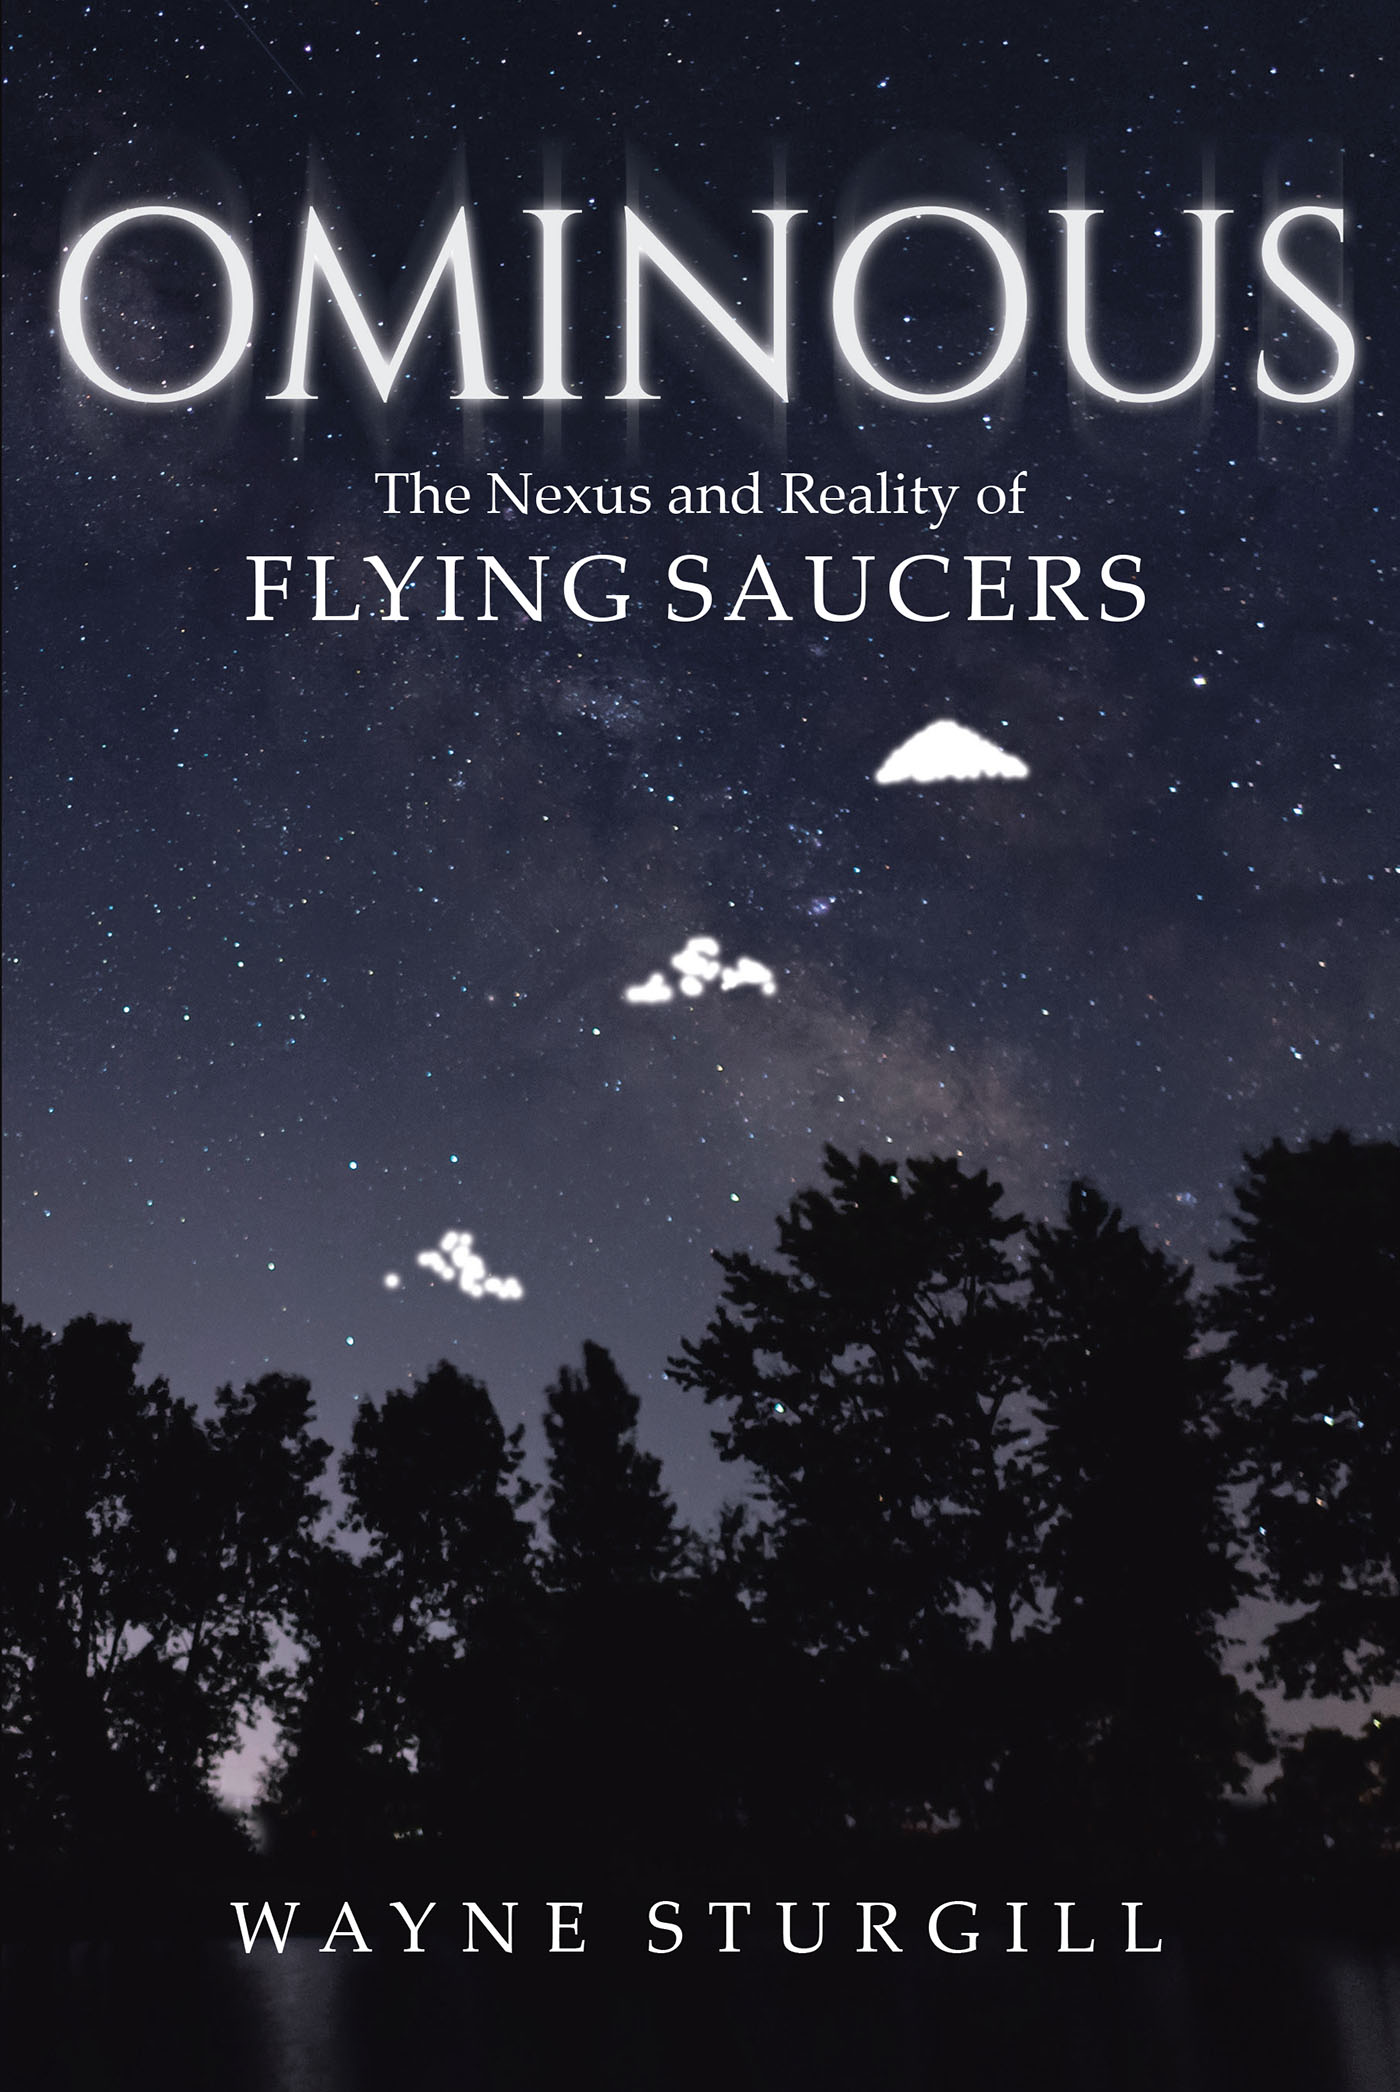 Wayne Sturgill’s New Book, "Ominous: The Nexus and Reality of Flying Saucers," is a Mysterious and Compelling True Story All About the Author’s Connection to UFOs